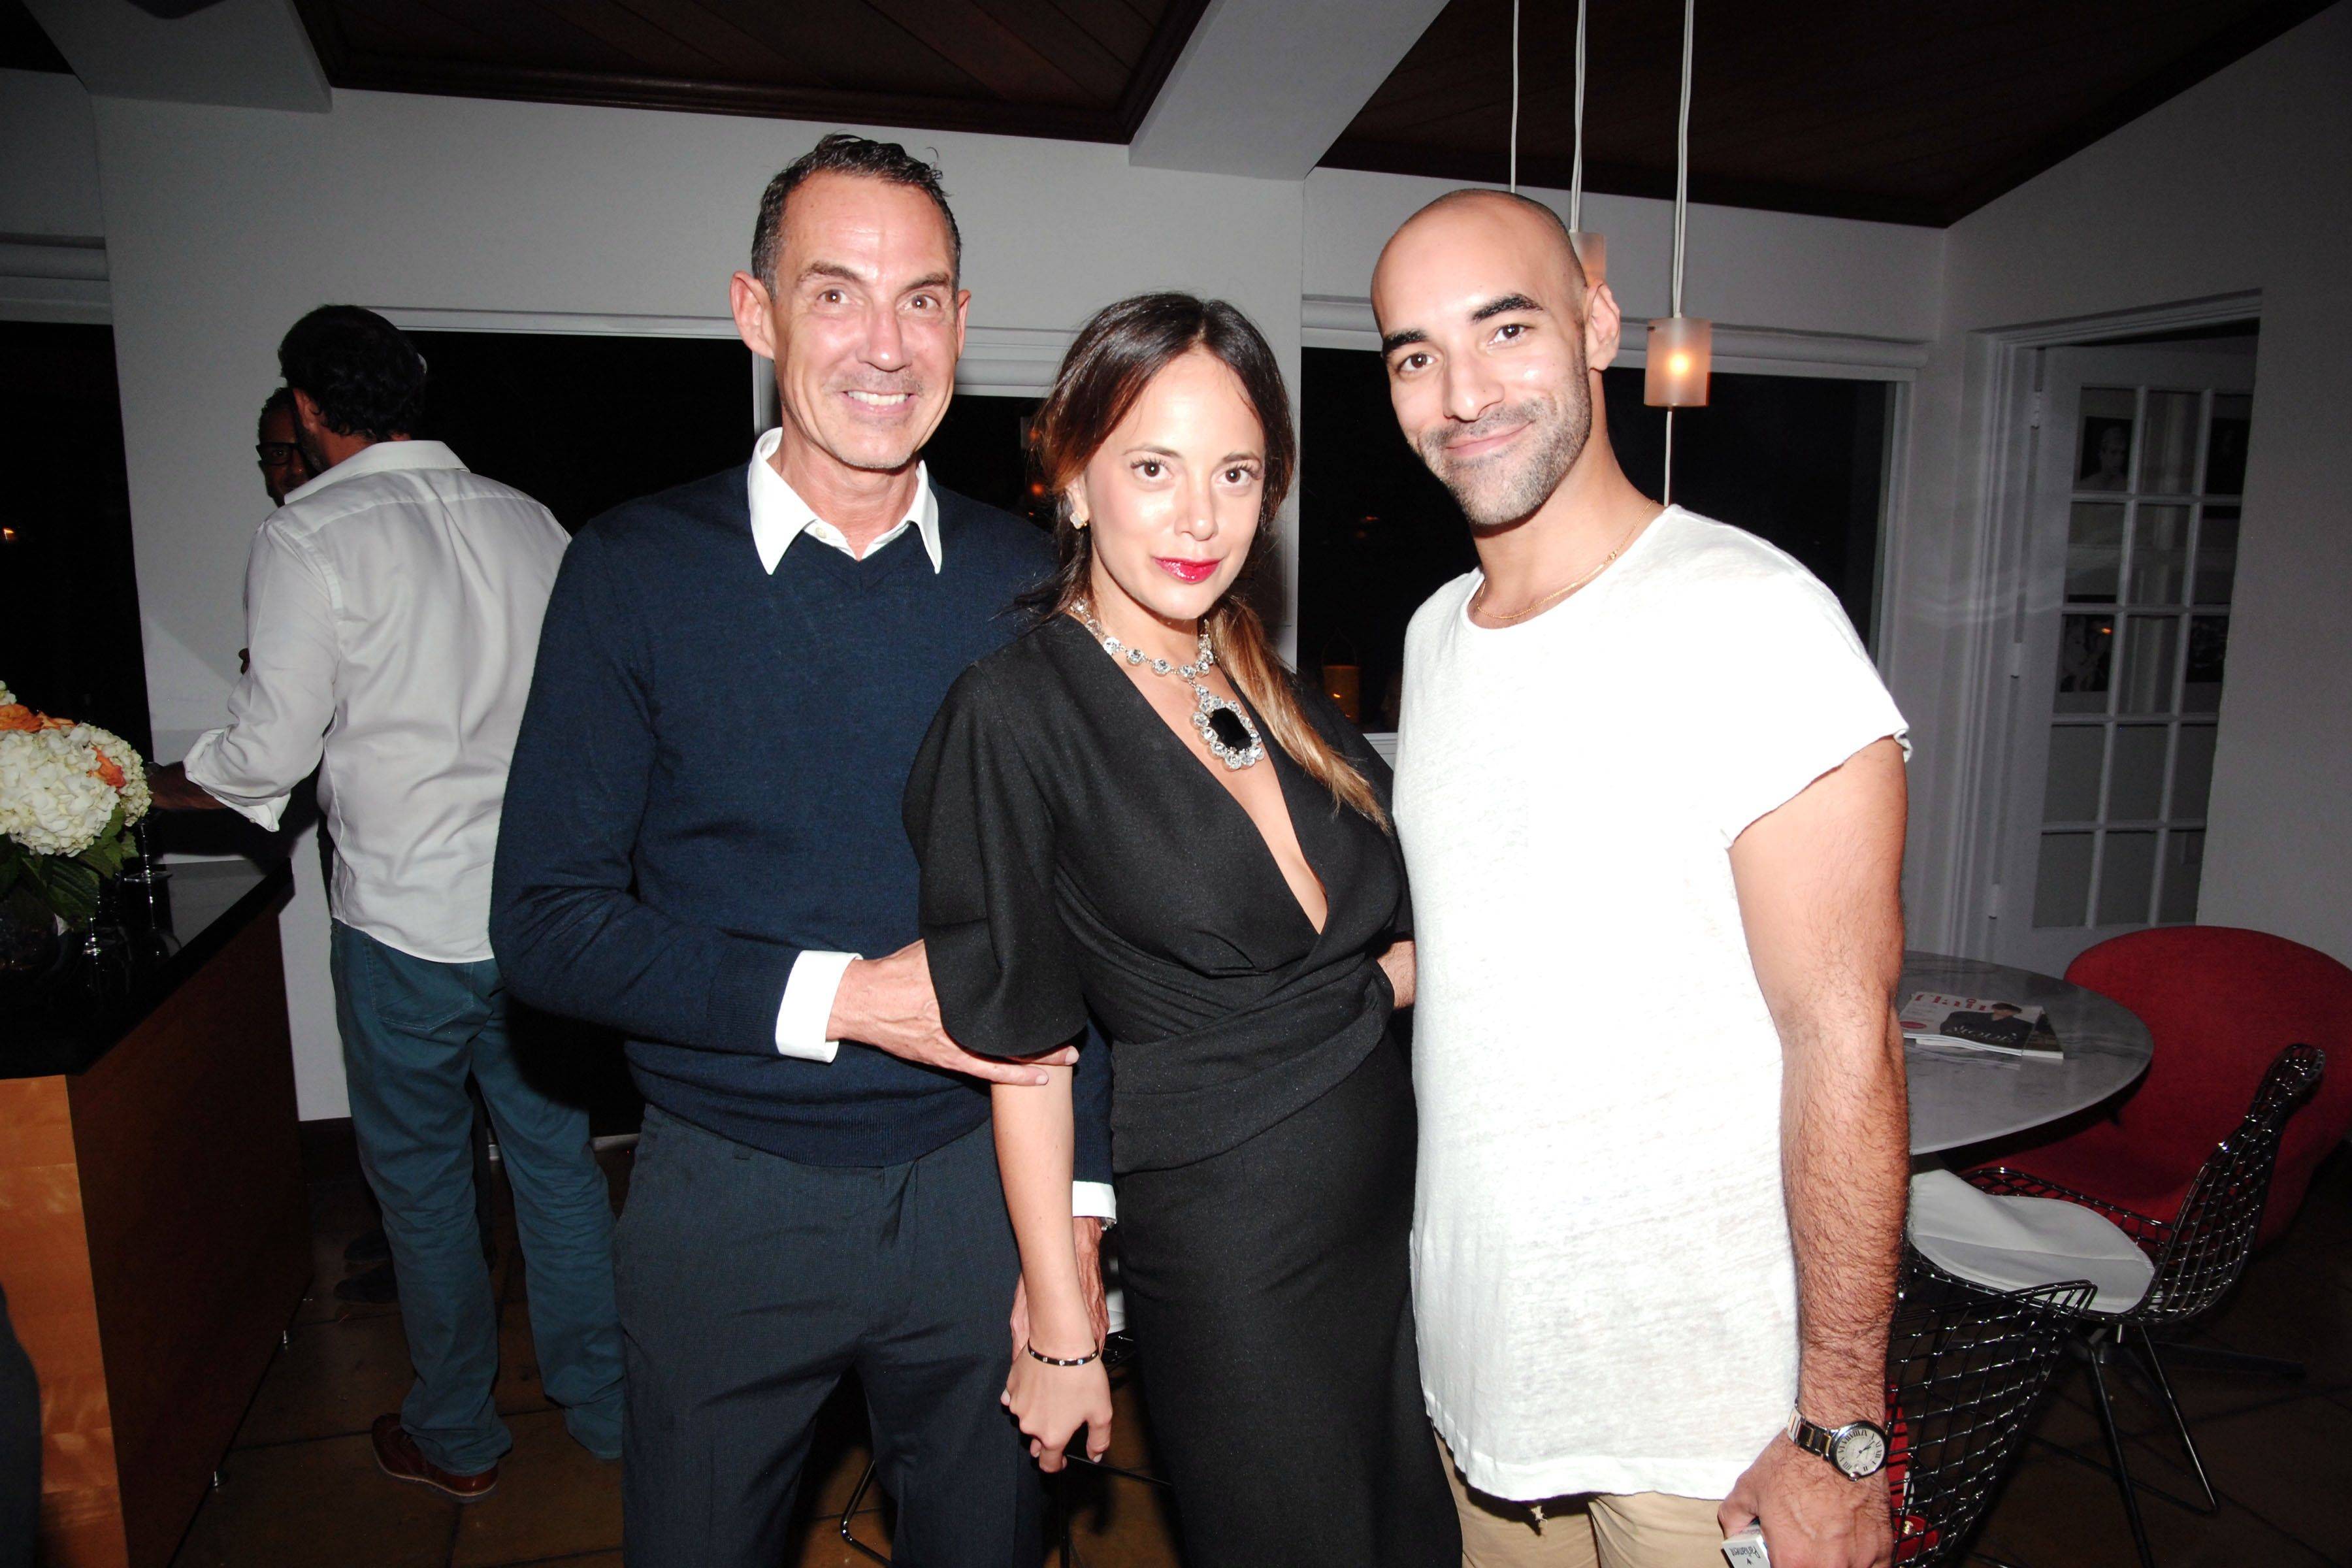 Christian Roth and Eric Domege Host an Evening Honoring Formento + Formento